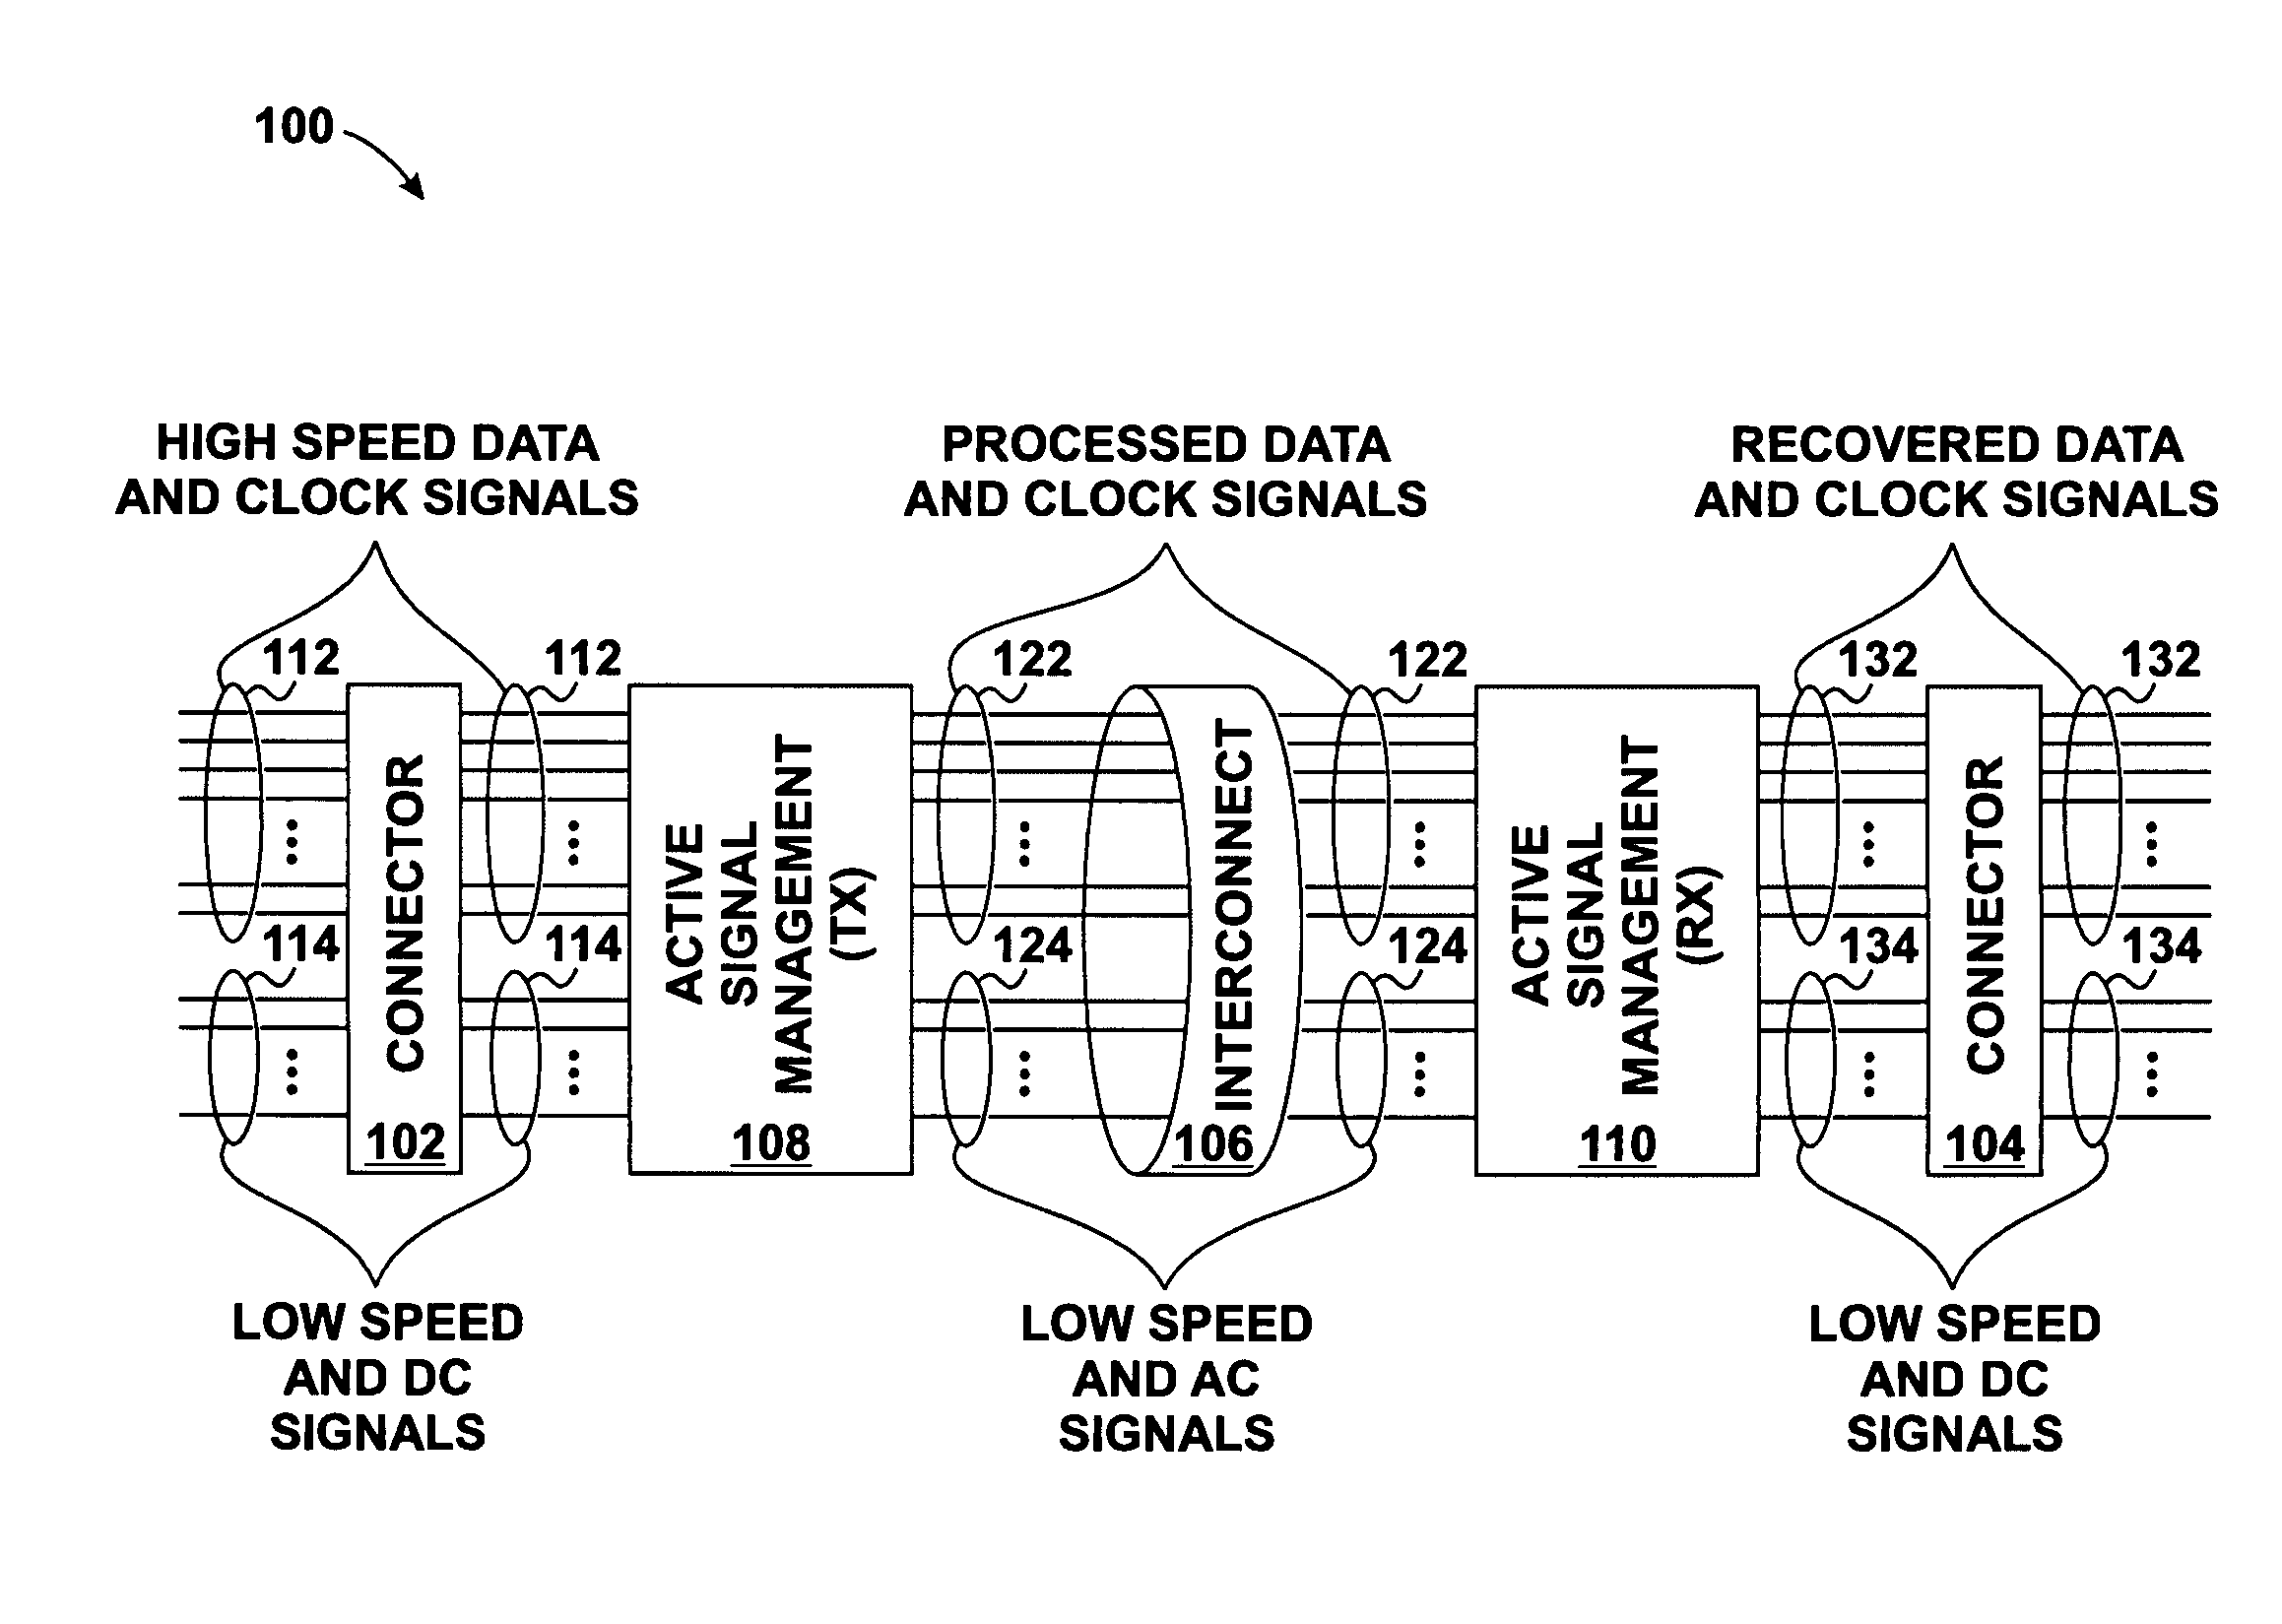 Skew management in cables and other interconnects